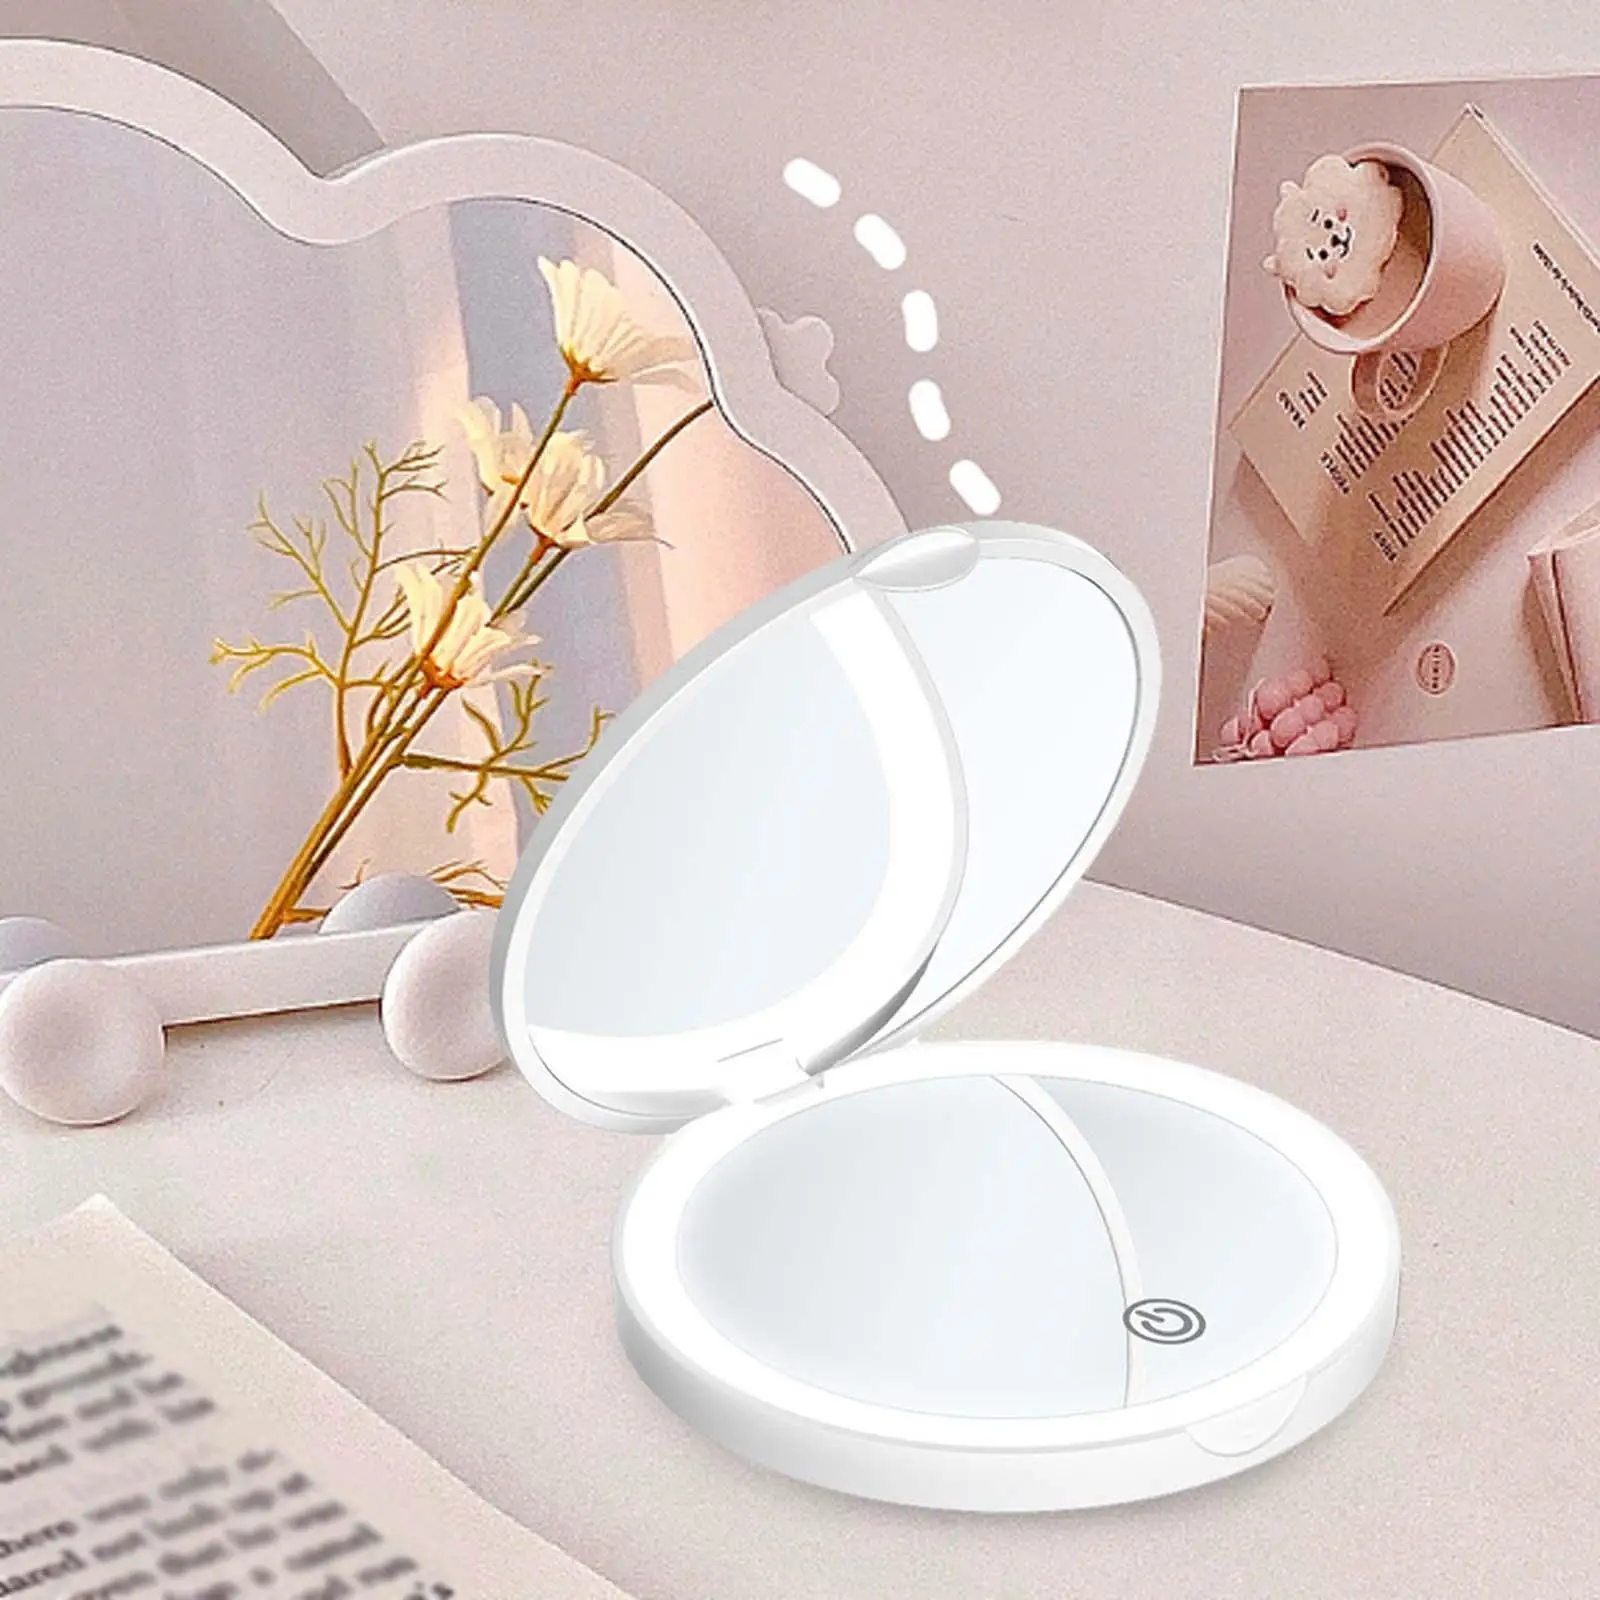 Lighted Travel Makeup Mirror Rechargeable Folding 2x Magnifying LED Compact Mirror for Pocket Purse Travel Handbag Women Girls